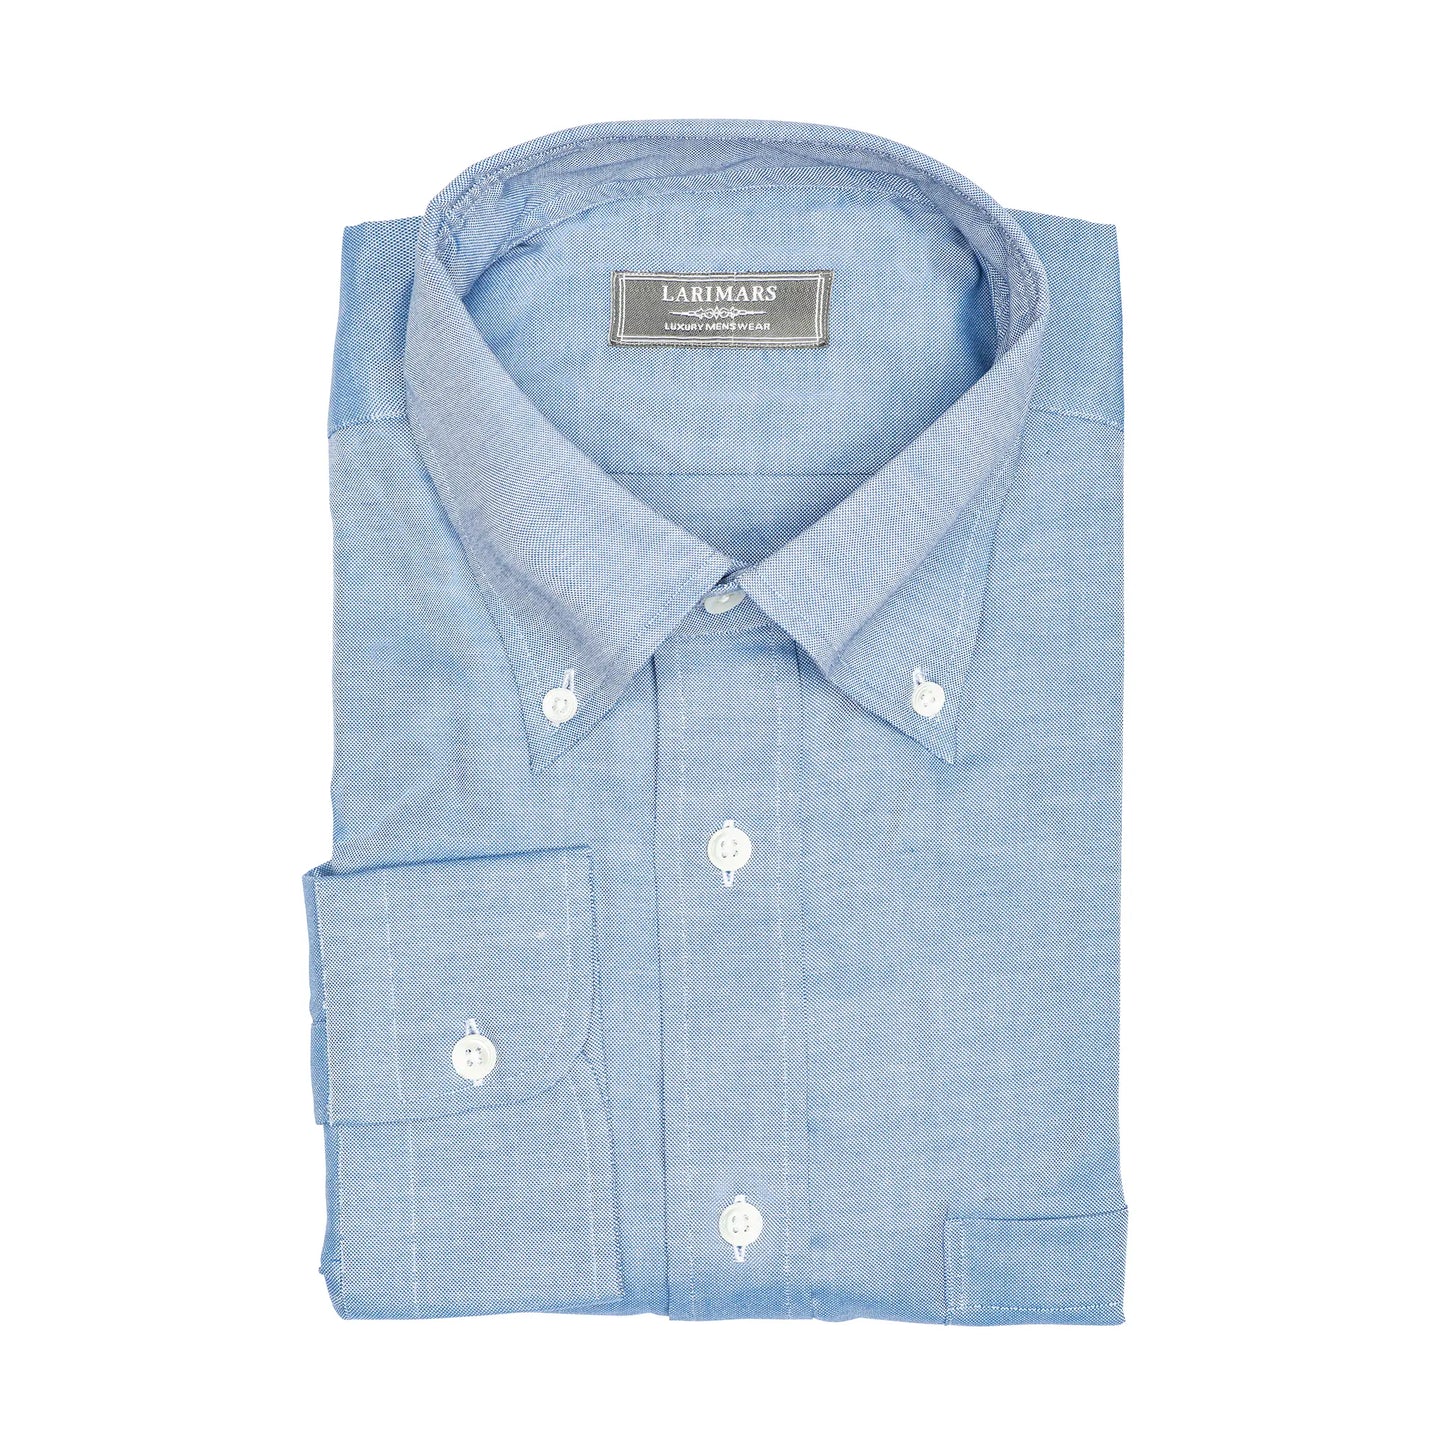 Blue Pin Oxford - Larimars Clothing Men's Formal and casual wear shirts